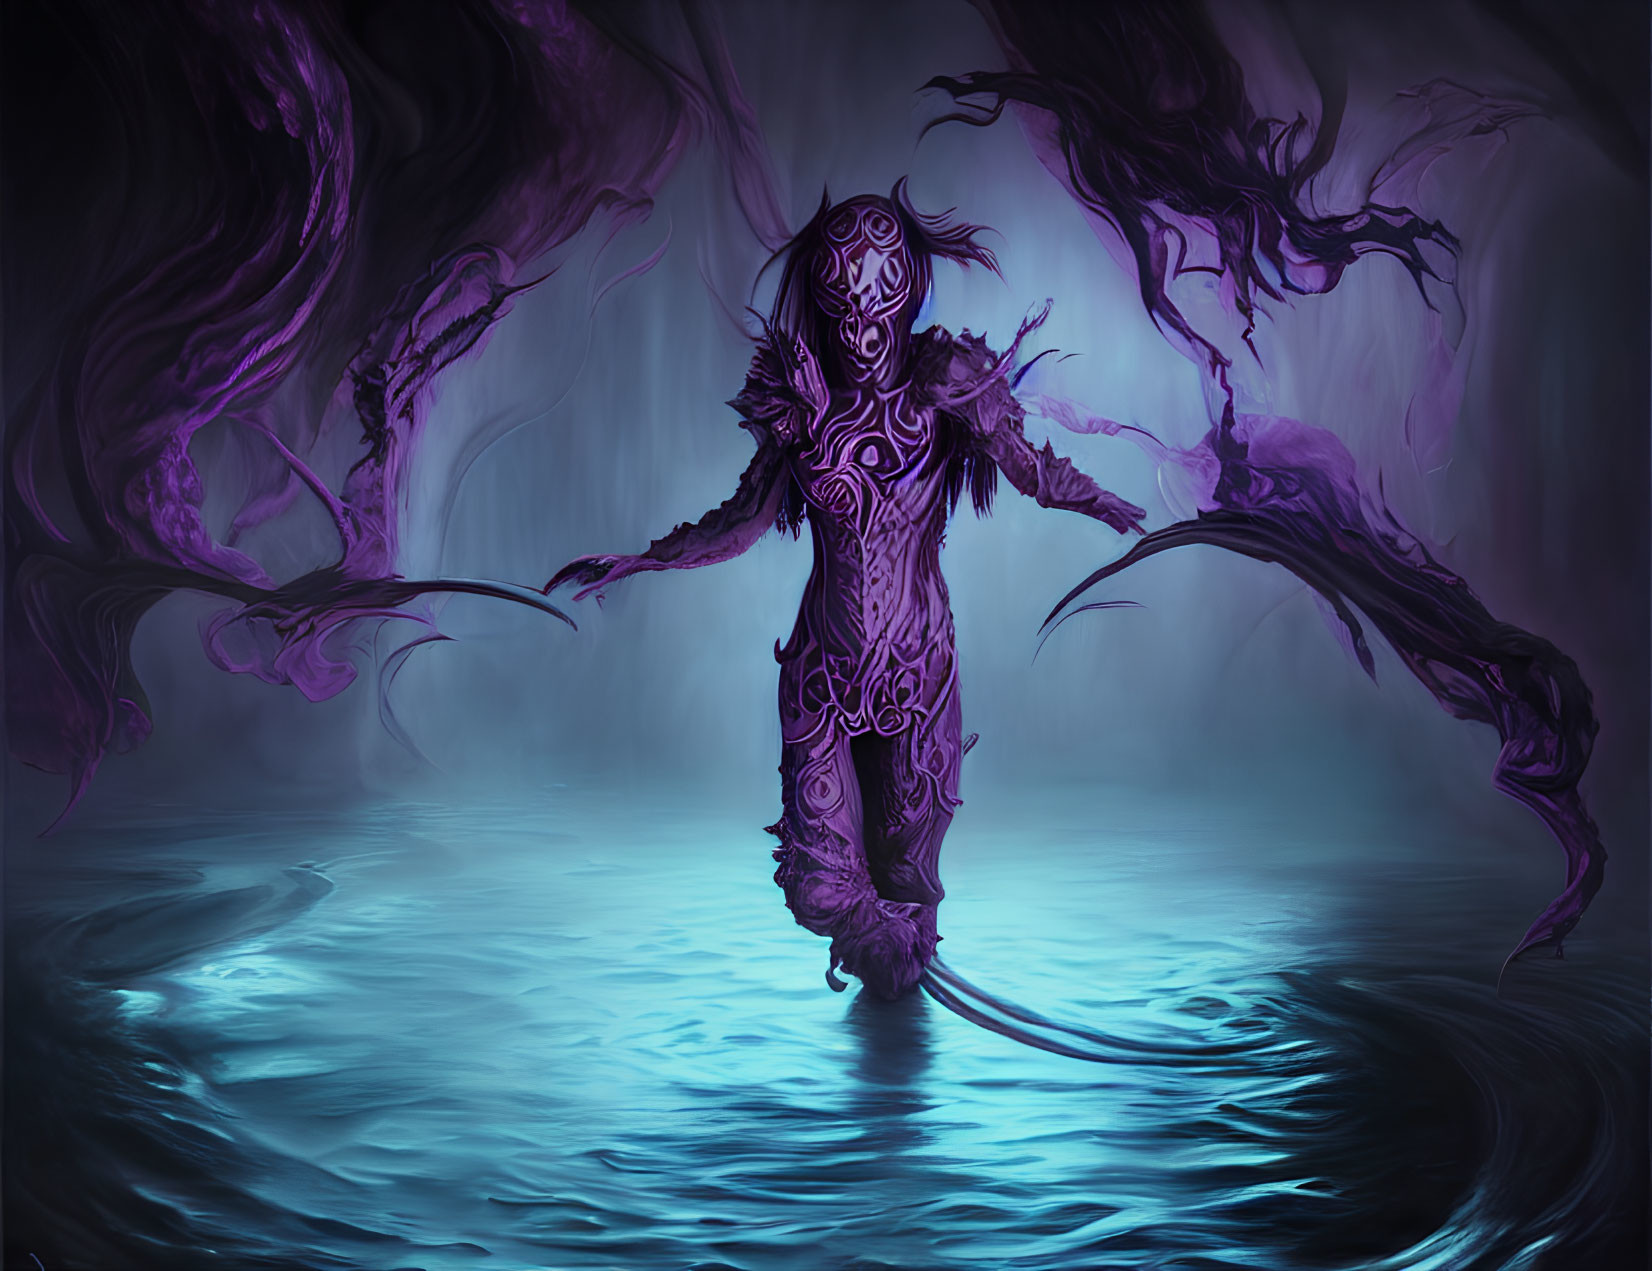 Glowing Purple Figure with Ethereal Wings in Mystical Water Scene